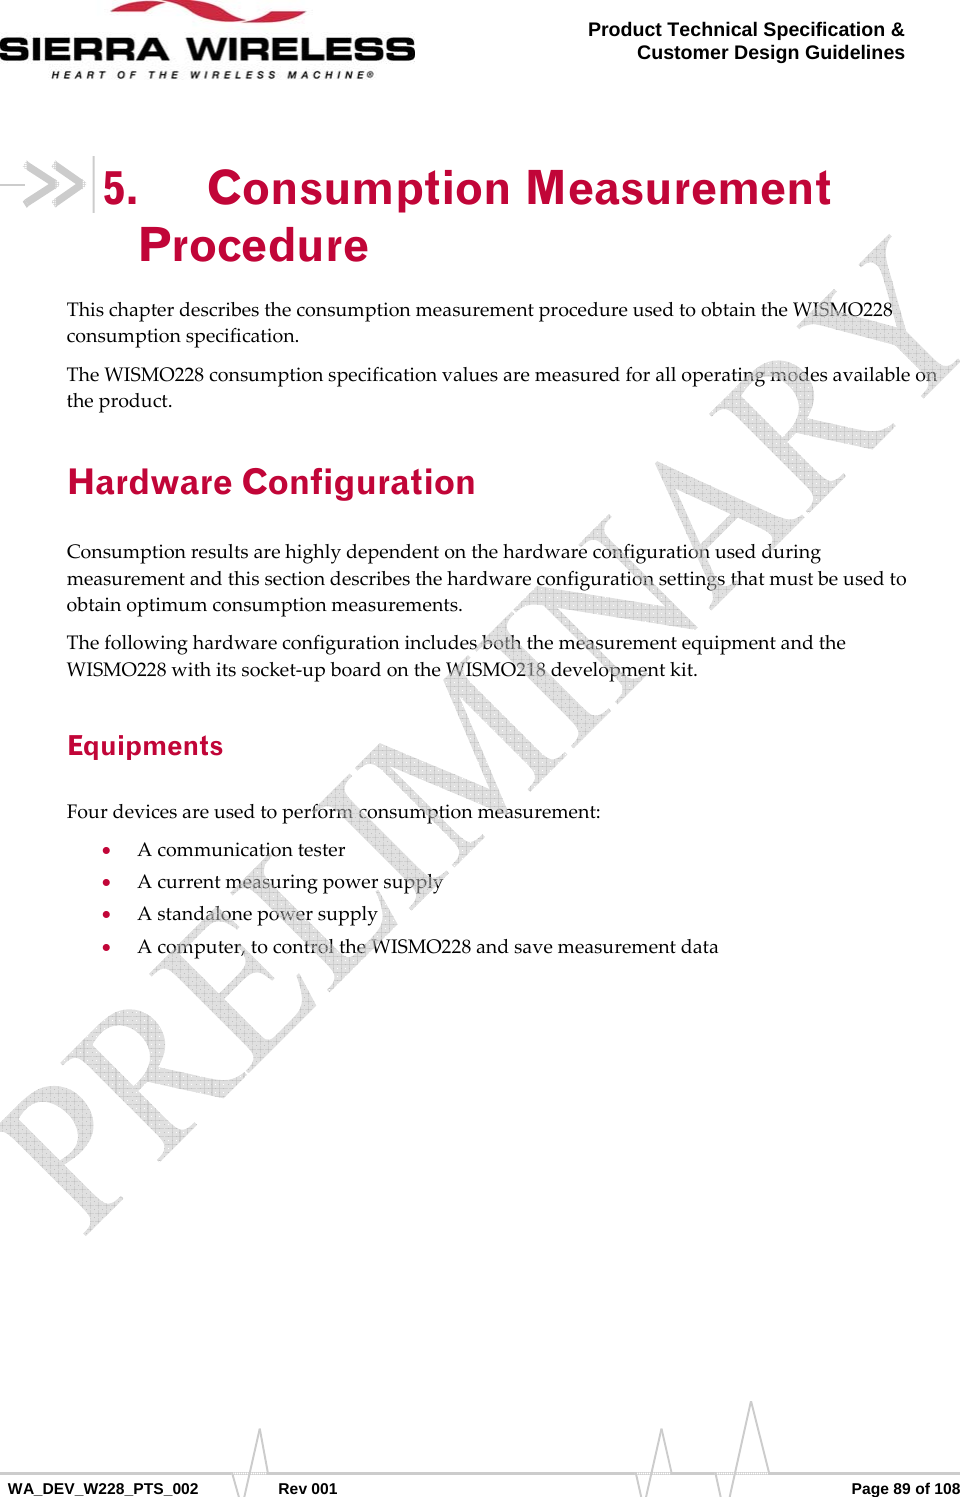      WA_DEV_W228_PTS_002 Rev 001  Page 89 of 108 Product Technical Specification &amp; Customer Design Guidelines 5. Consumption Measurement Procedure ThischapterdescribestheconsumptionmeasurementprocedureusedtoobtaintheWISMO228consumptionspecification.TheWISMO228consumptionspecificationvaluesaremeasuredforalloperatingmodesavailableontheproduct.Hardware Configuration Consumptionresultsarehighlydependentonthehardwareconfigurationusedduringmeasurementandthissectiondescribesthehardwareconfigurationsettingsthatmustbeusedtoobtainoptimumconsumptionmeasurements.ThefollowinghardwareconfigurationincludesboththemeasurementequipmentandtheWISMO228withitssocket‐upboardontheWISMO218developmentkit.Equipments Fourdevicesareusedtoperformconsumptionmeasurement:• Acommunicationtester• Acurrentmeasuringpowersupply• Astandalonepowersupply• Acomputer,tocontroltheWISMO228andsavemeasurementdata   